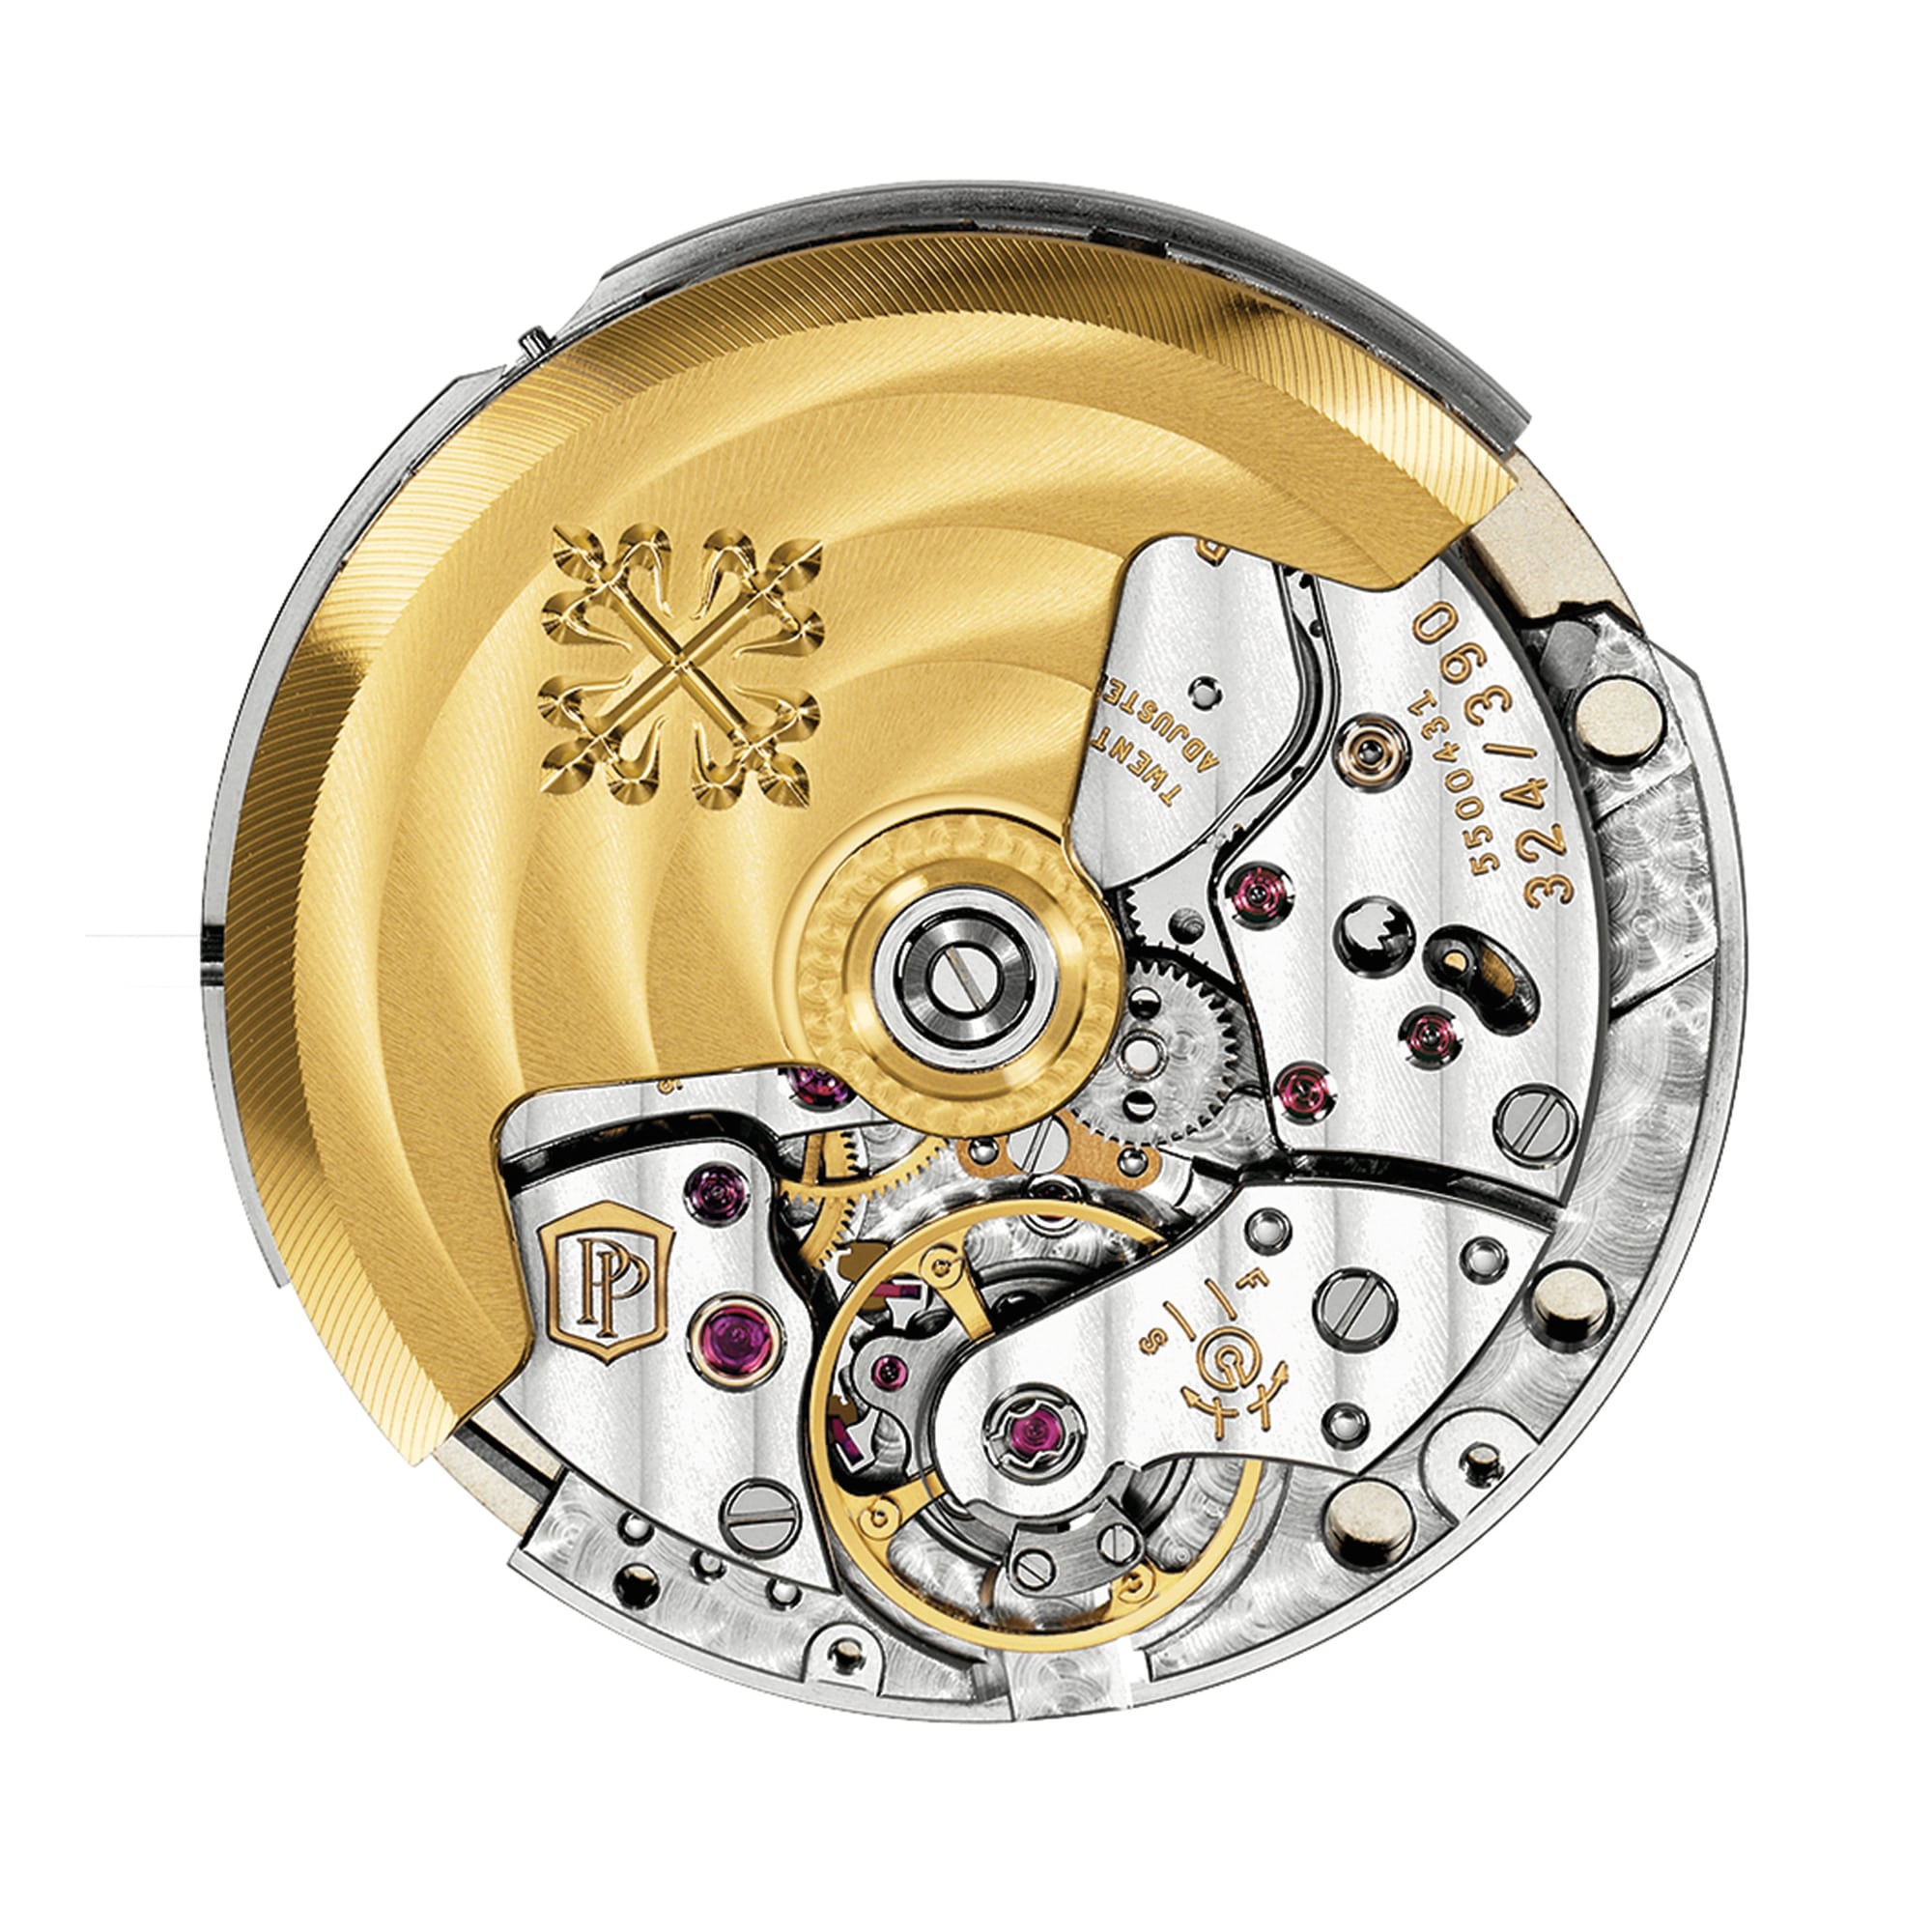 Patek Philippe’s Caliber 324 S C is marked with the double P of the Patek Philippe Seal.